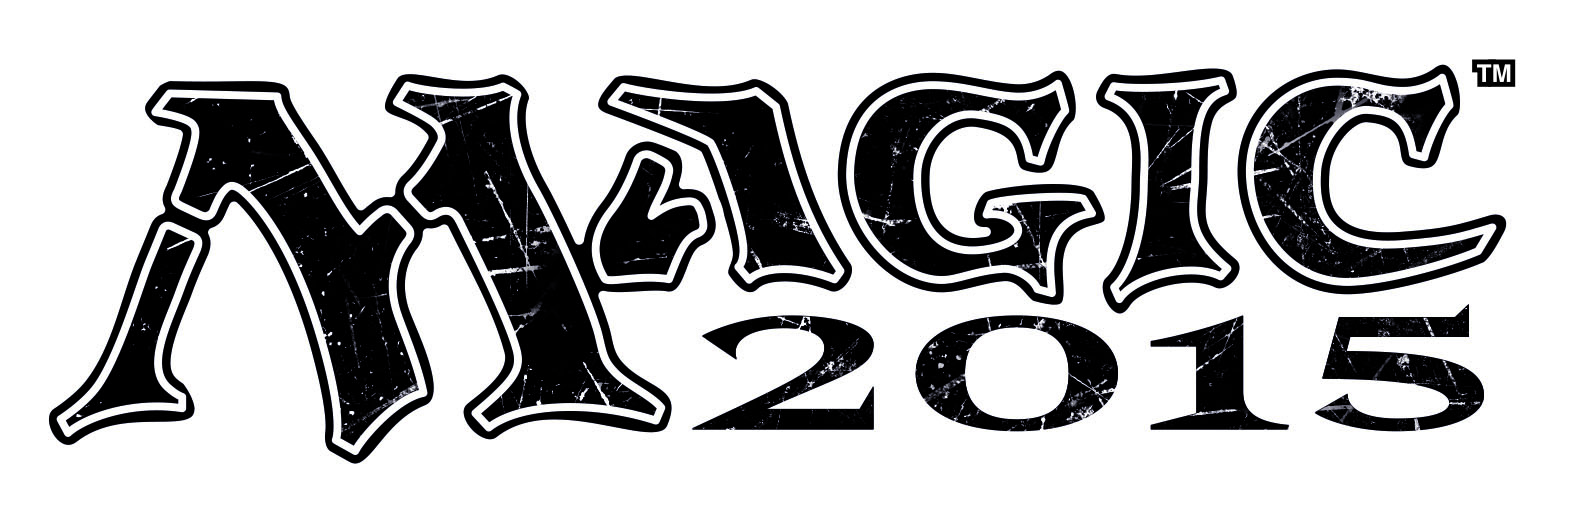 Magic: The Gathering clipart #3, Download drawings